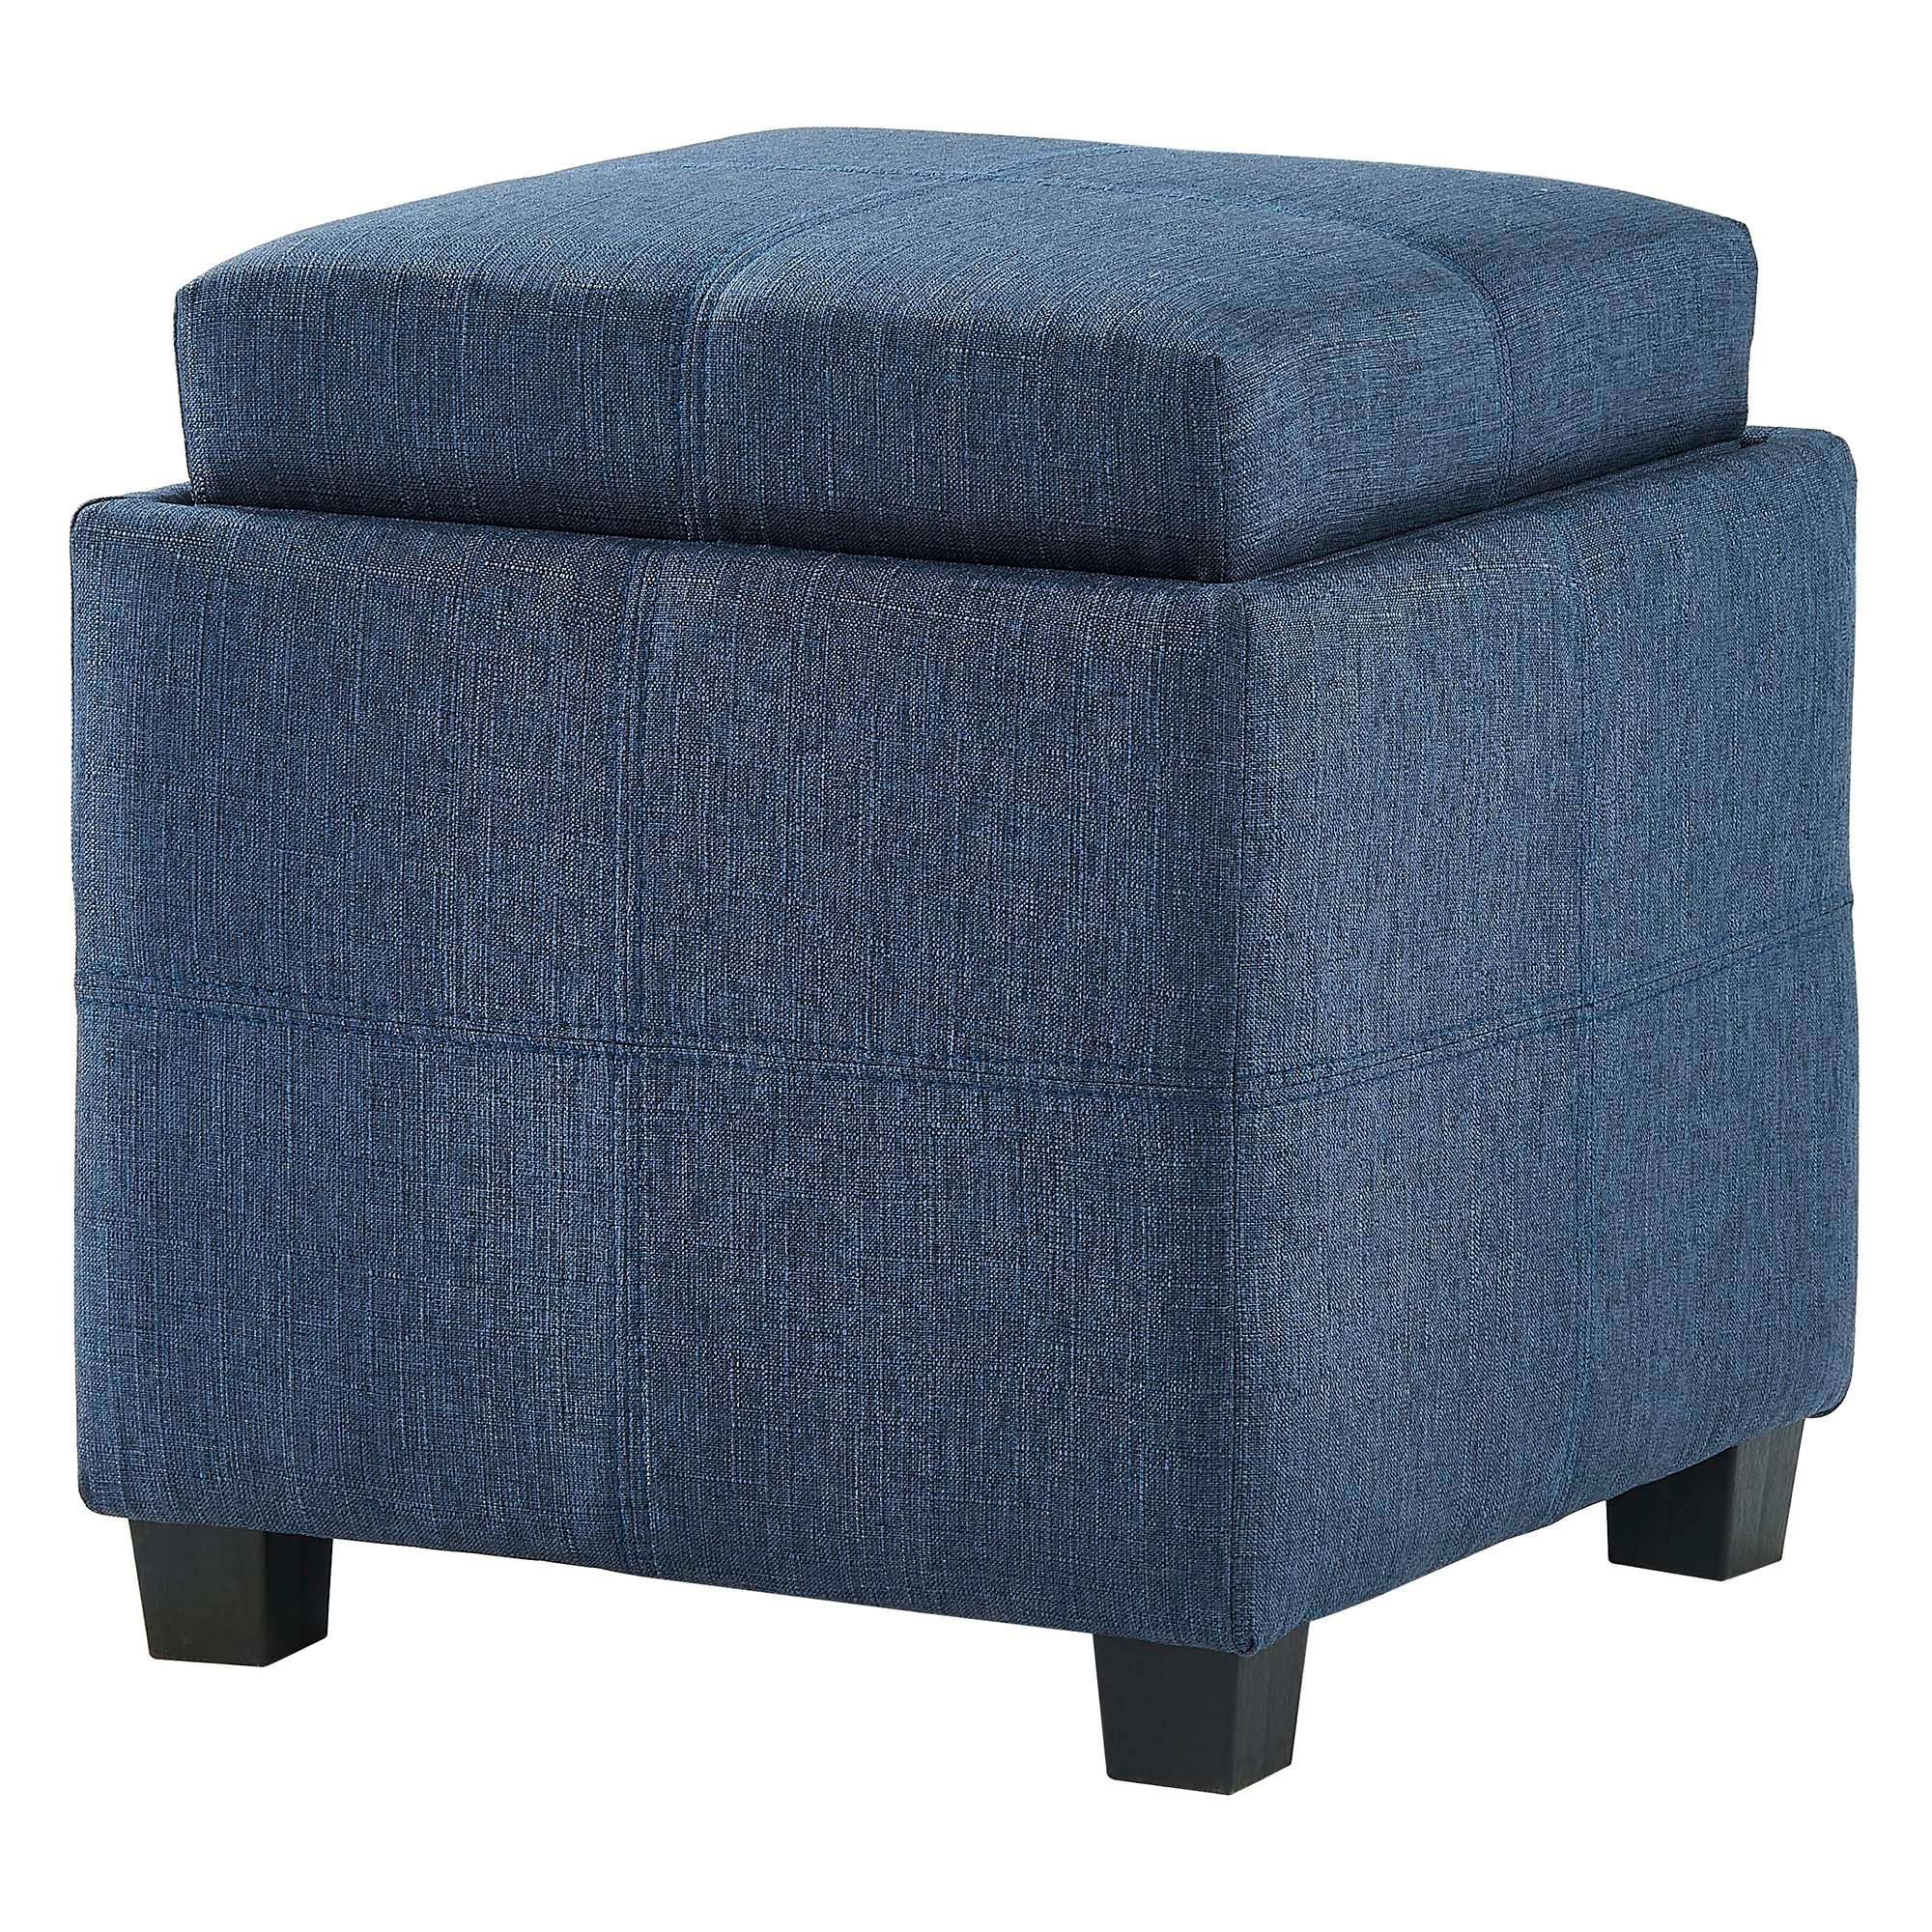 19" Blue And Gray Transitional Square Storage Ottoman With Reversible Intended For Square Cube Ottomans (View 6 of 20)